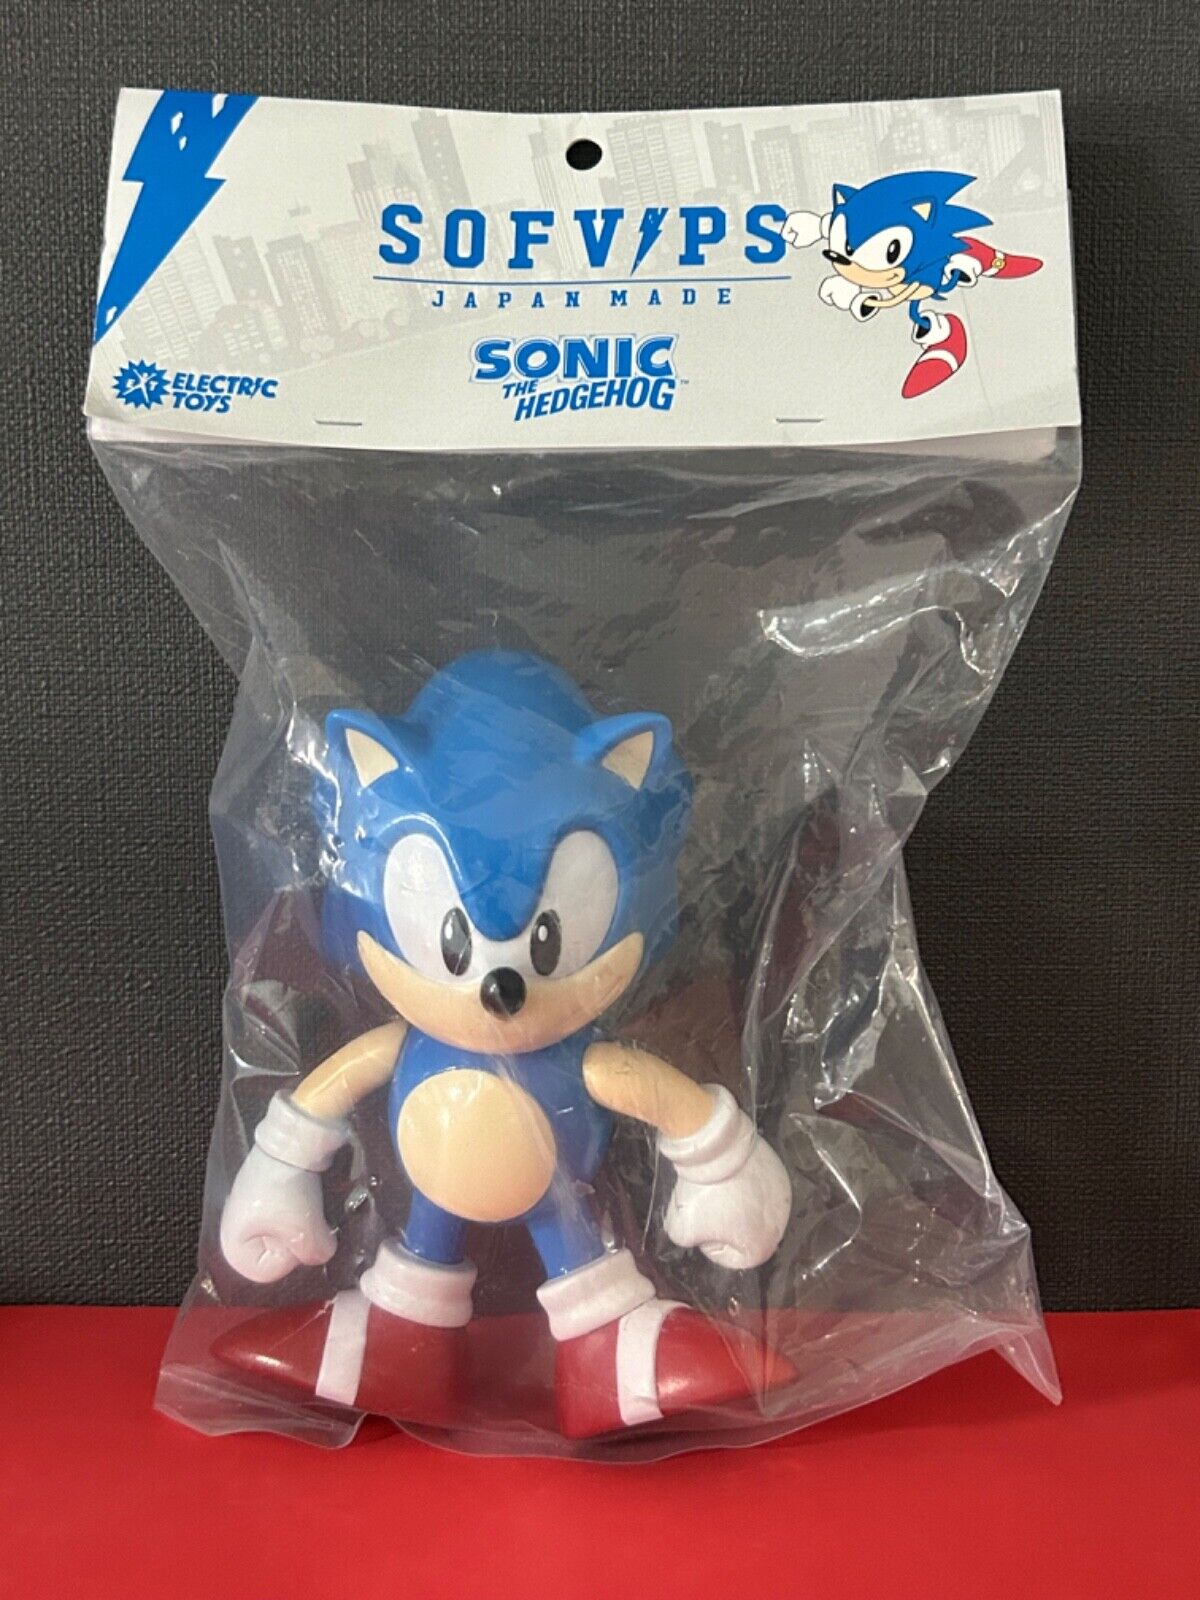 Sonic the Hedgehog Sofvips Finished Product Unopened Soft Vinyl Figure Soup JP .